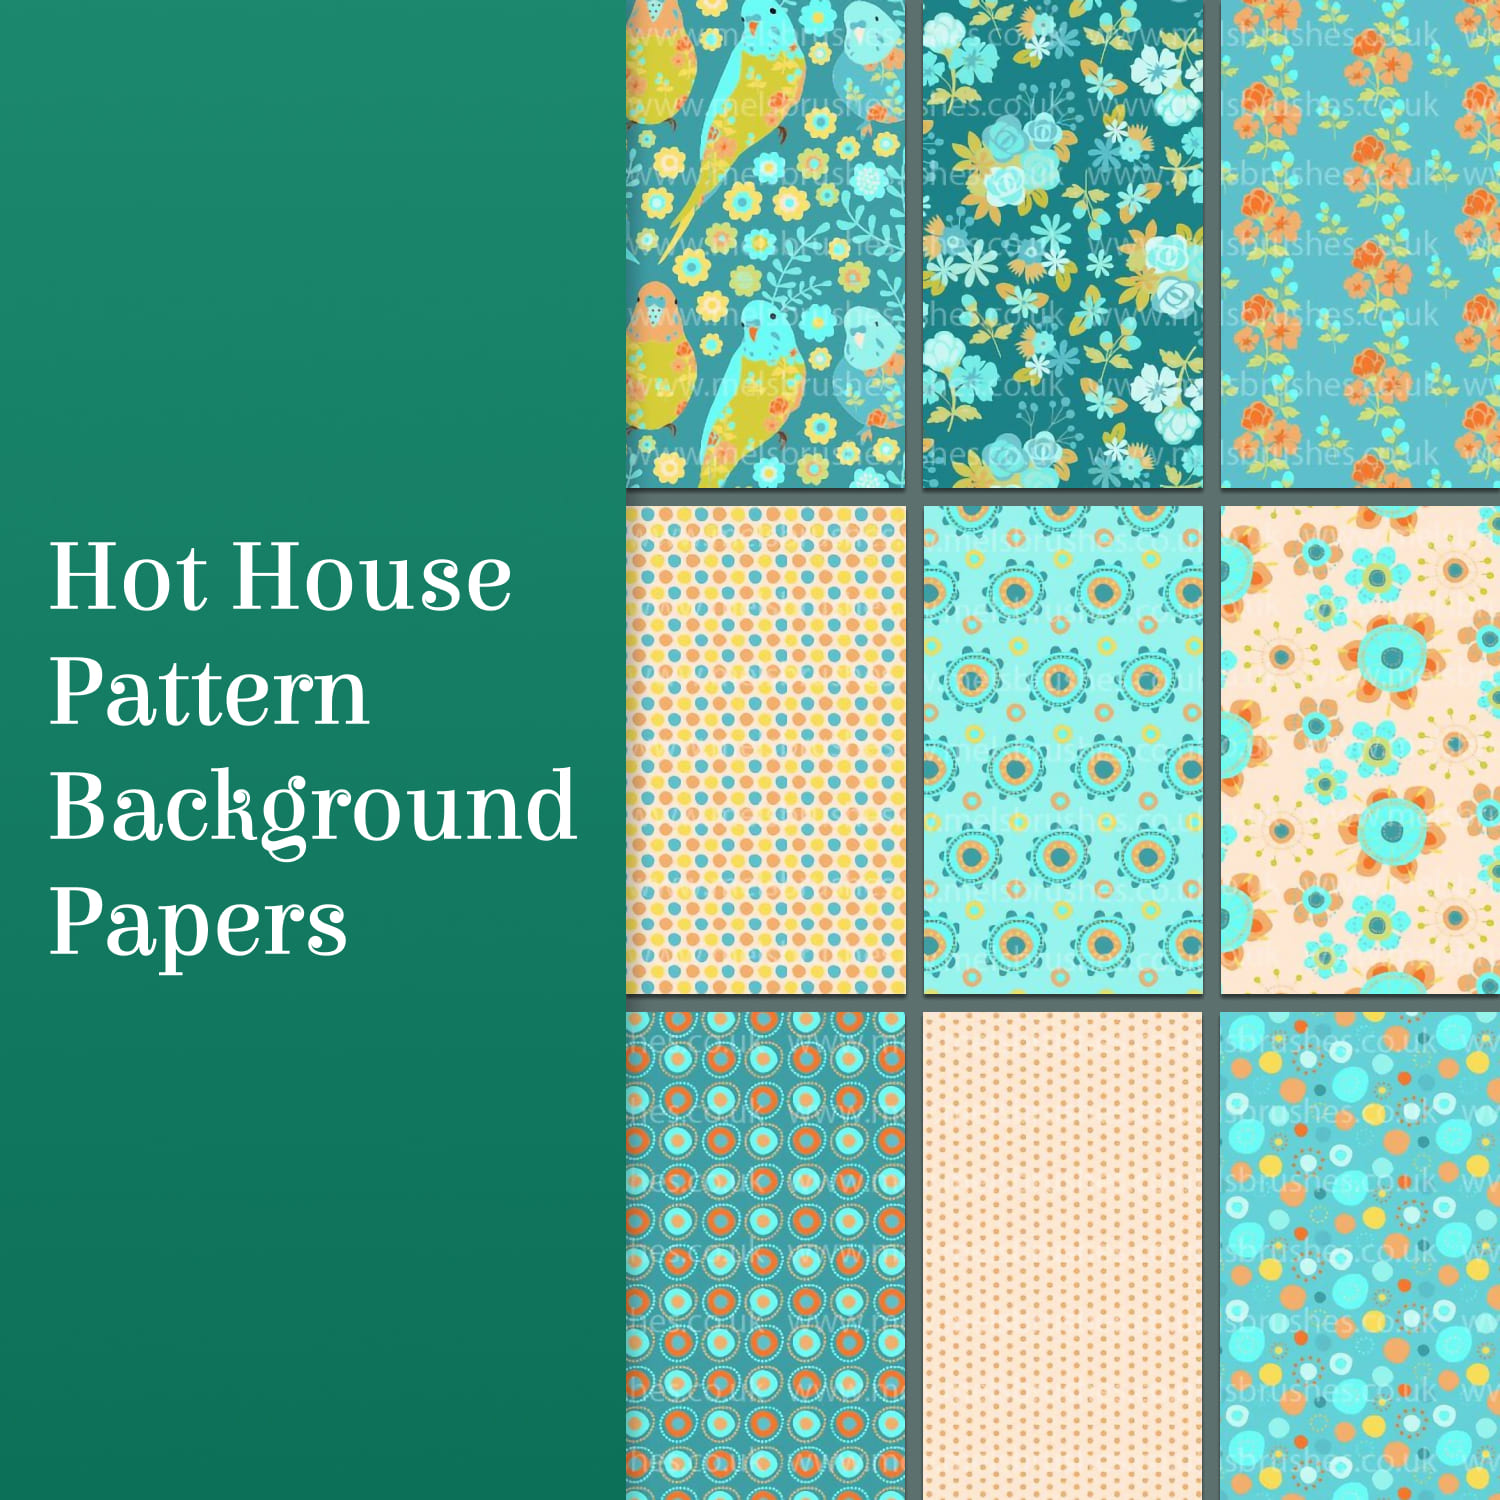 Hot house pattern background papers - main image preview.